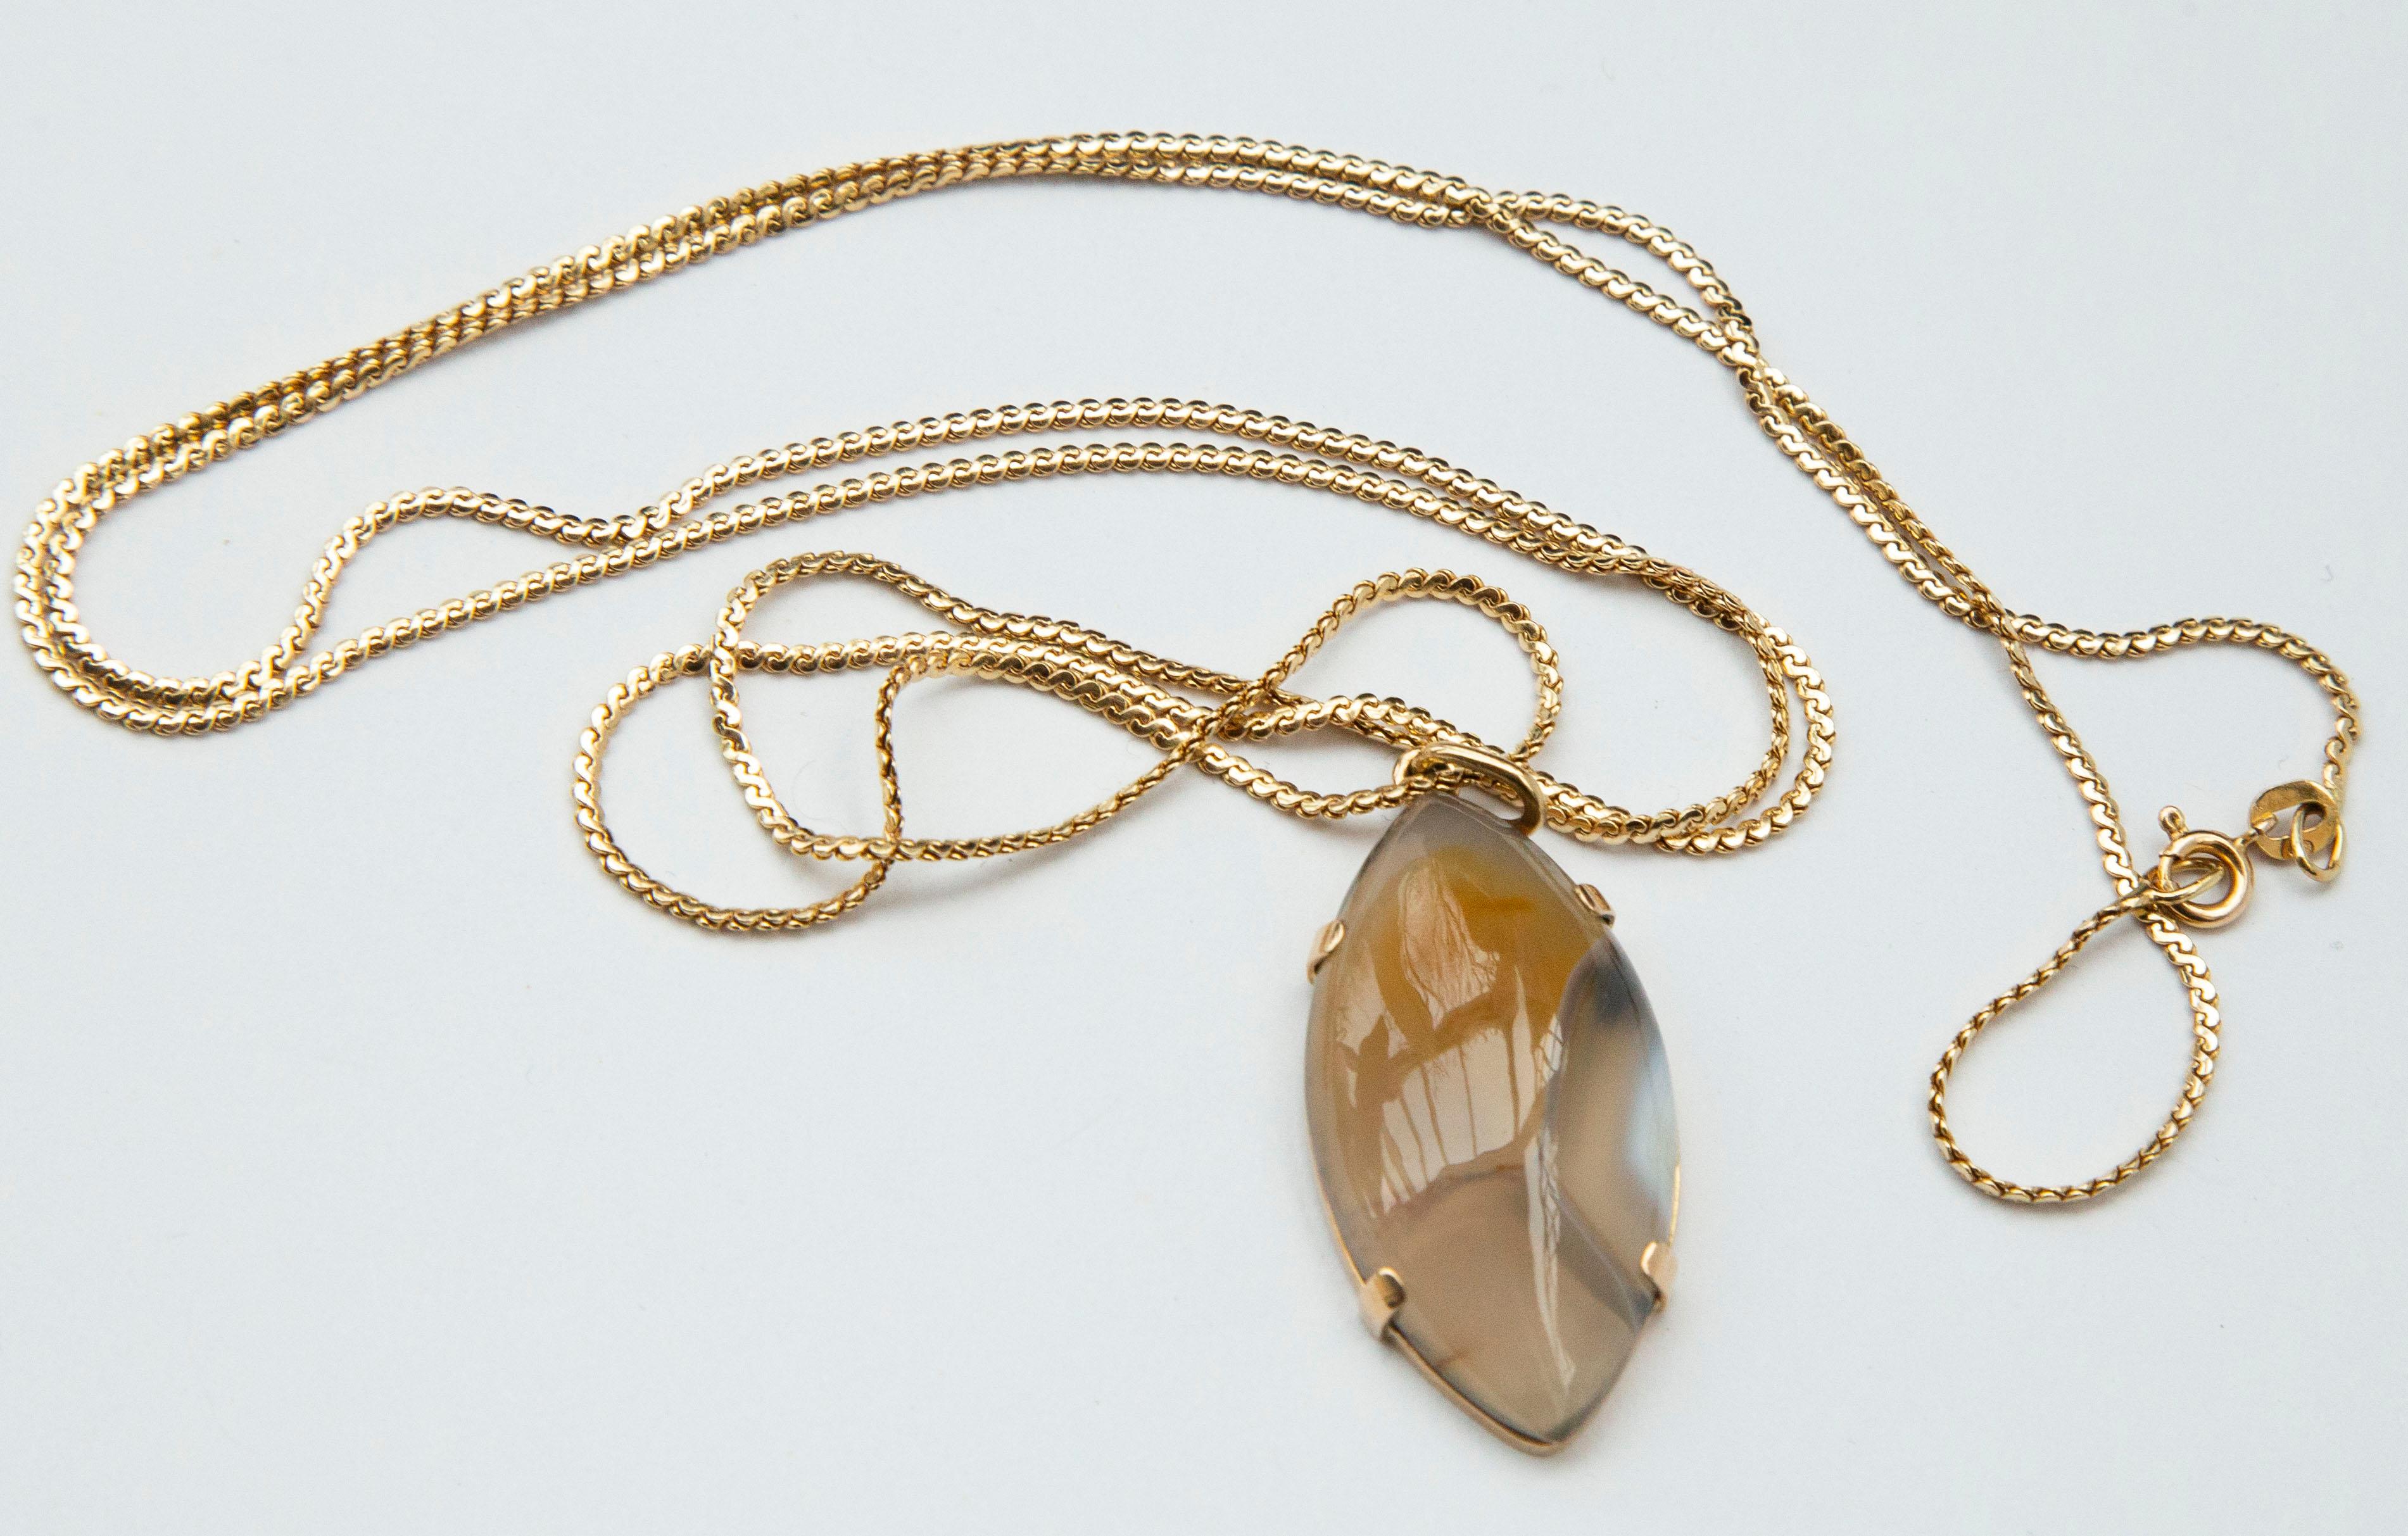 A vintage 14 karat yellow gold necklace chain with an agate pendant in 14 karat yellow gold setting.

The necklace chain is 80 CM / 32 Inch long and it weighs 7.7 grams. It is marked with 585 that stands for 585/14 karat gold content.
The pendant is